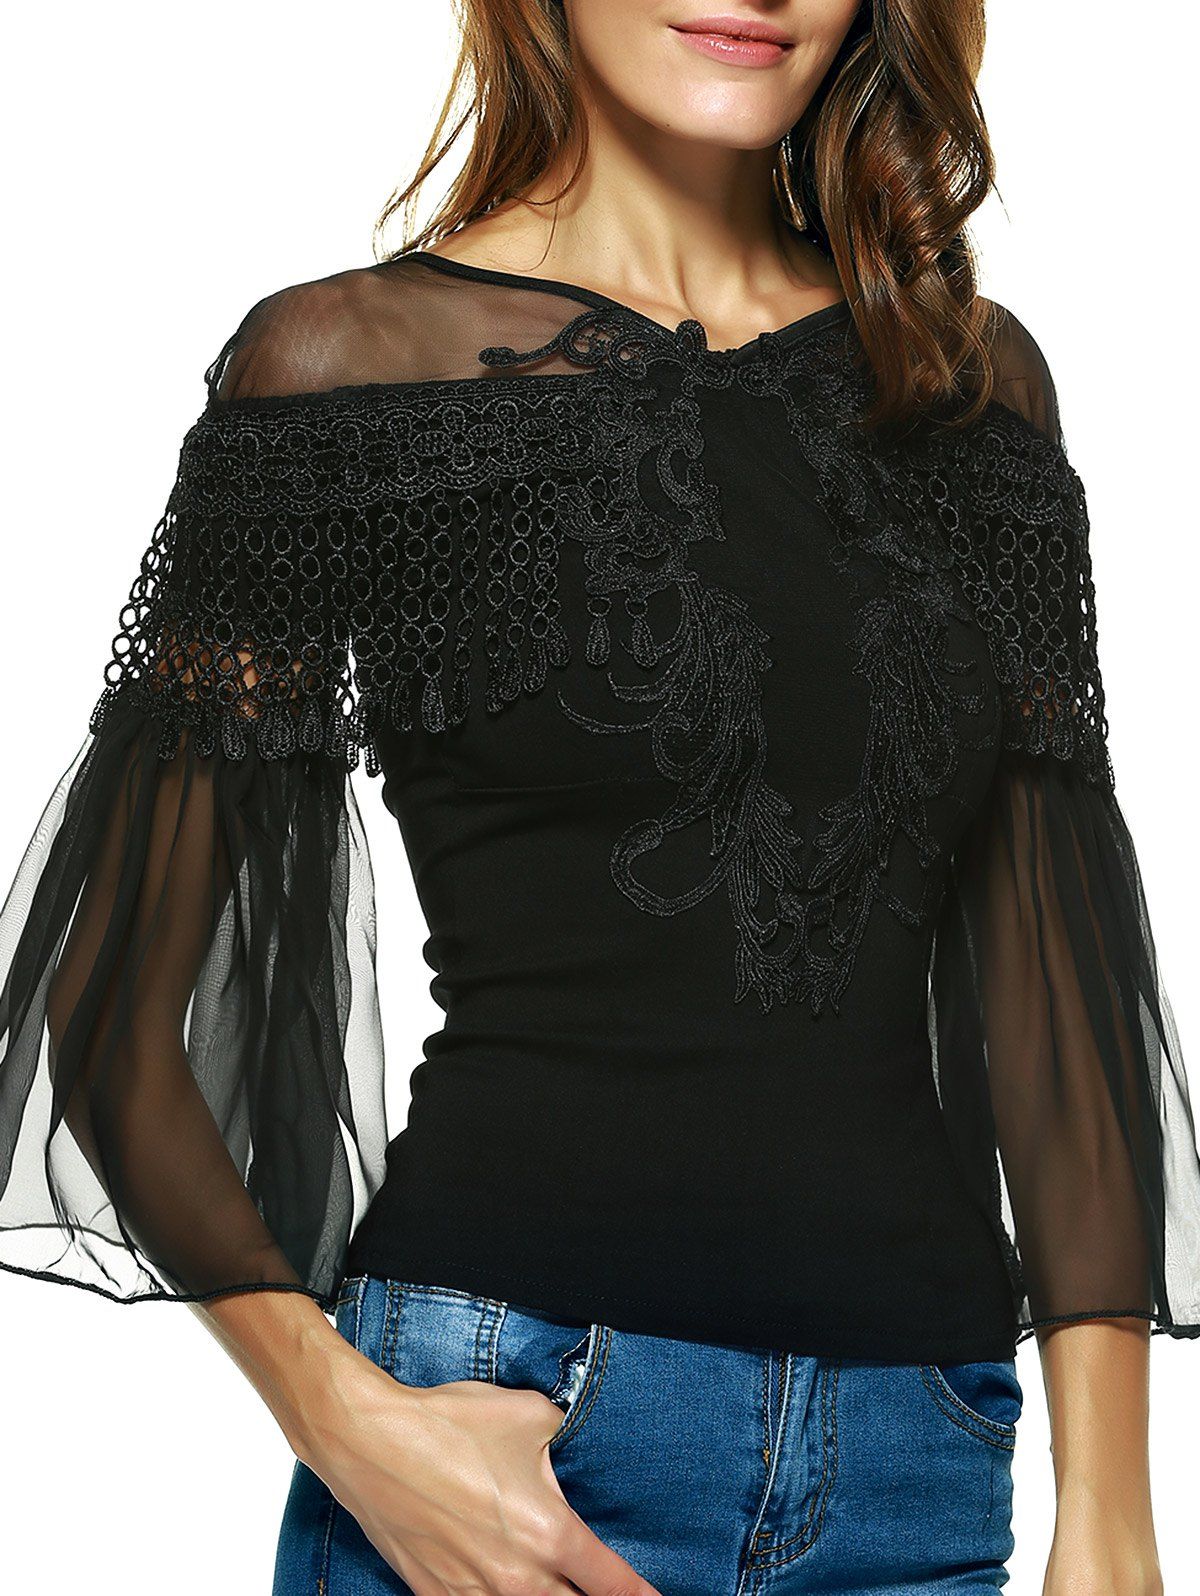 44-off-graceful-women-s-bell-sleeves-embroidered-mesh-spliced-blouse